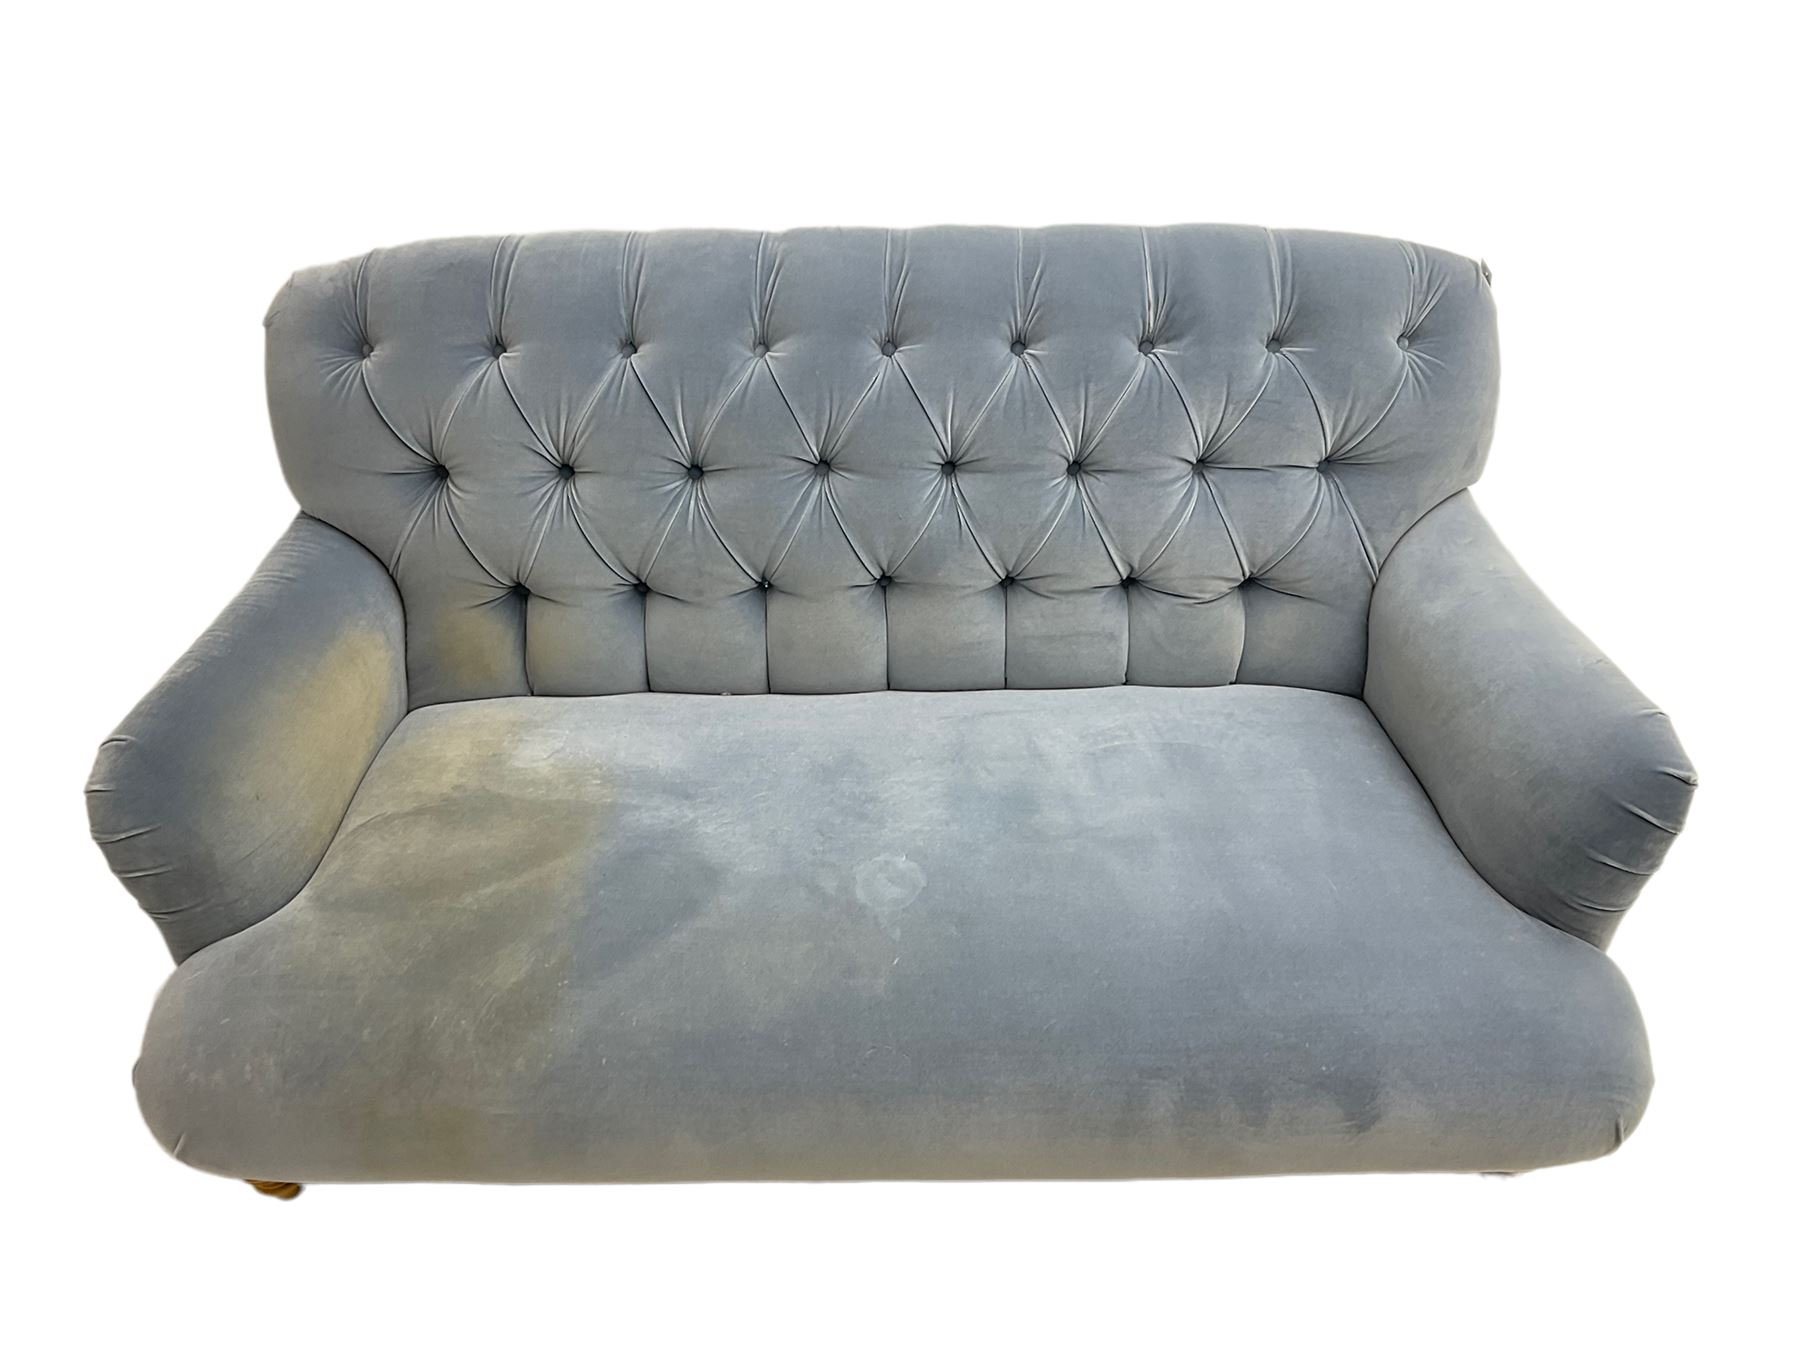 Tetrad - two seat sofa upholstered in baby blue buttoned fabric - Image 6 of 6